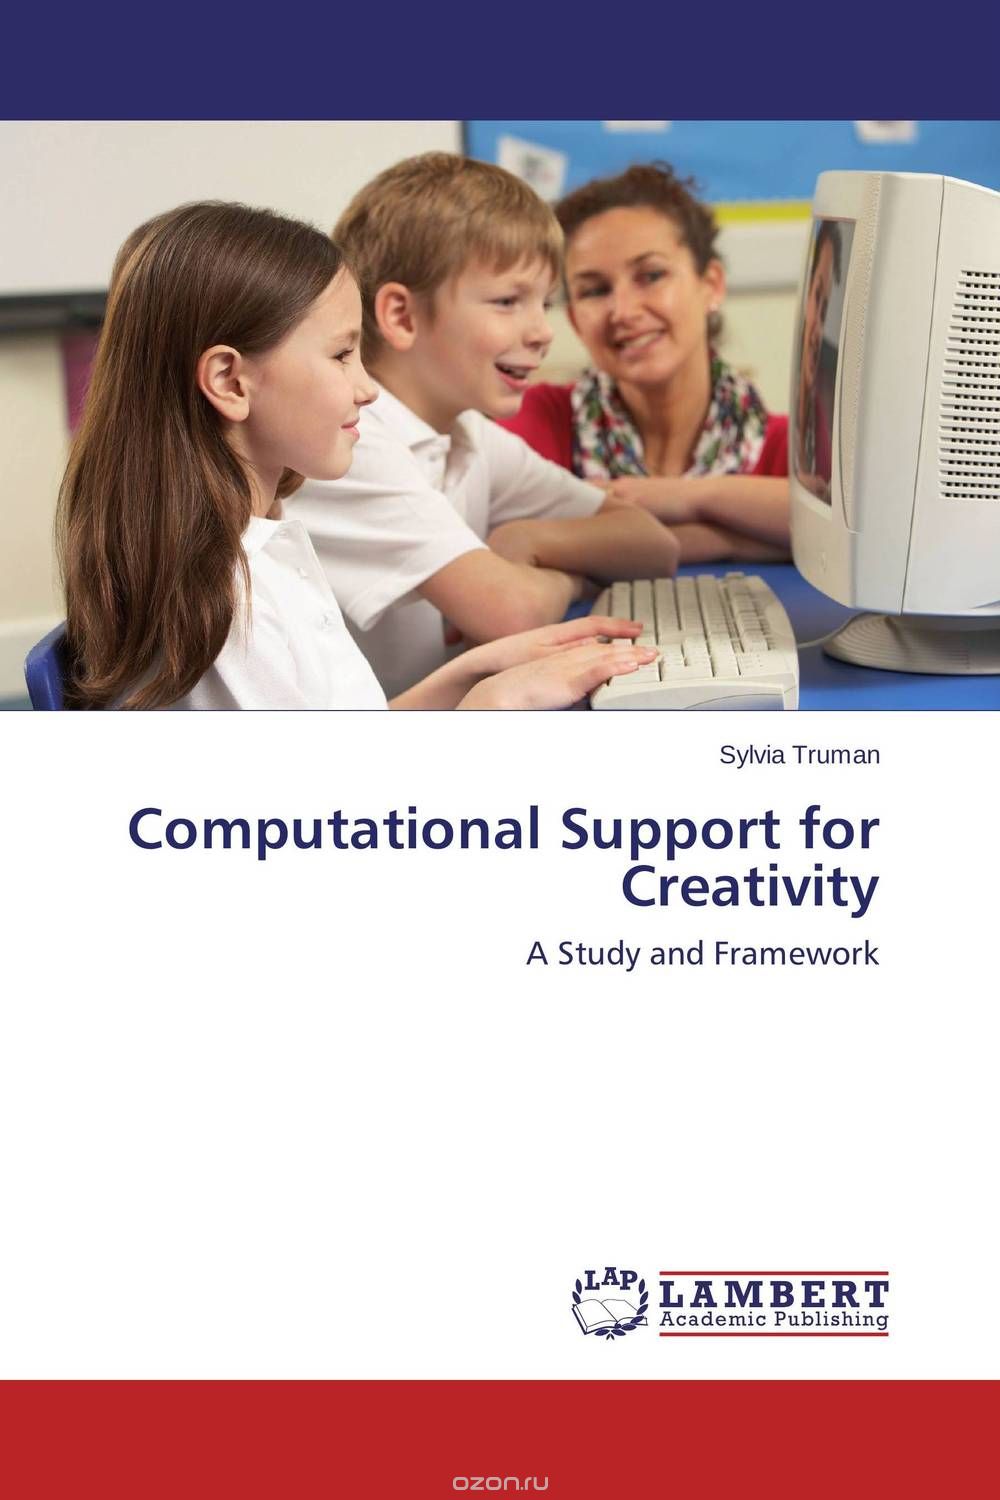 Computational Support for Creativity